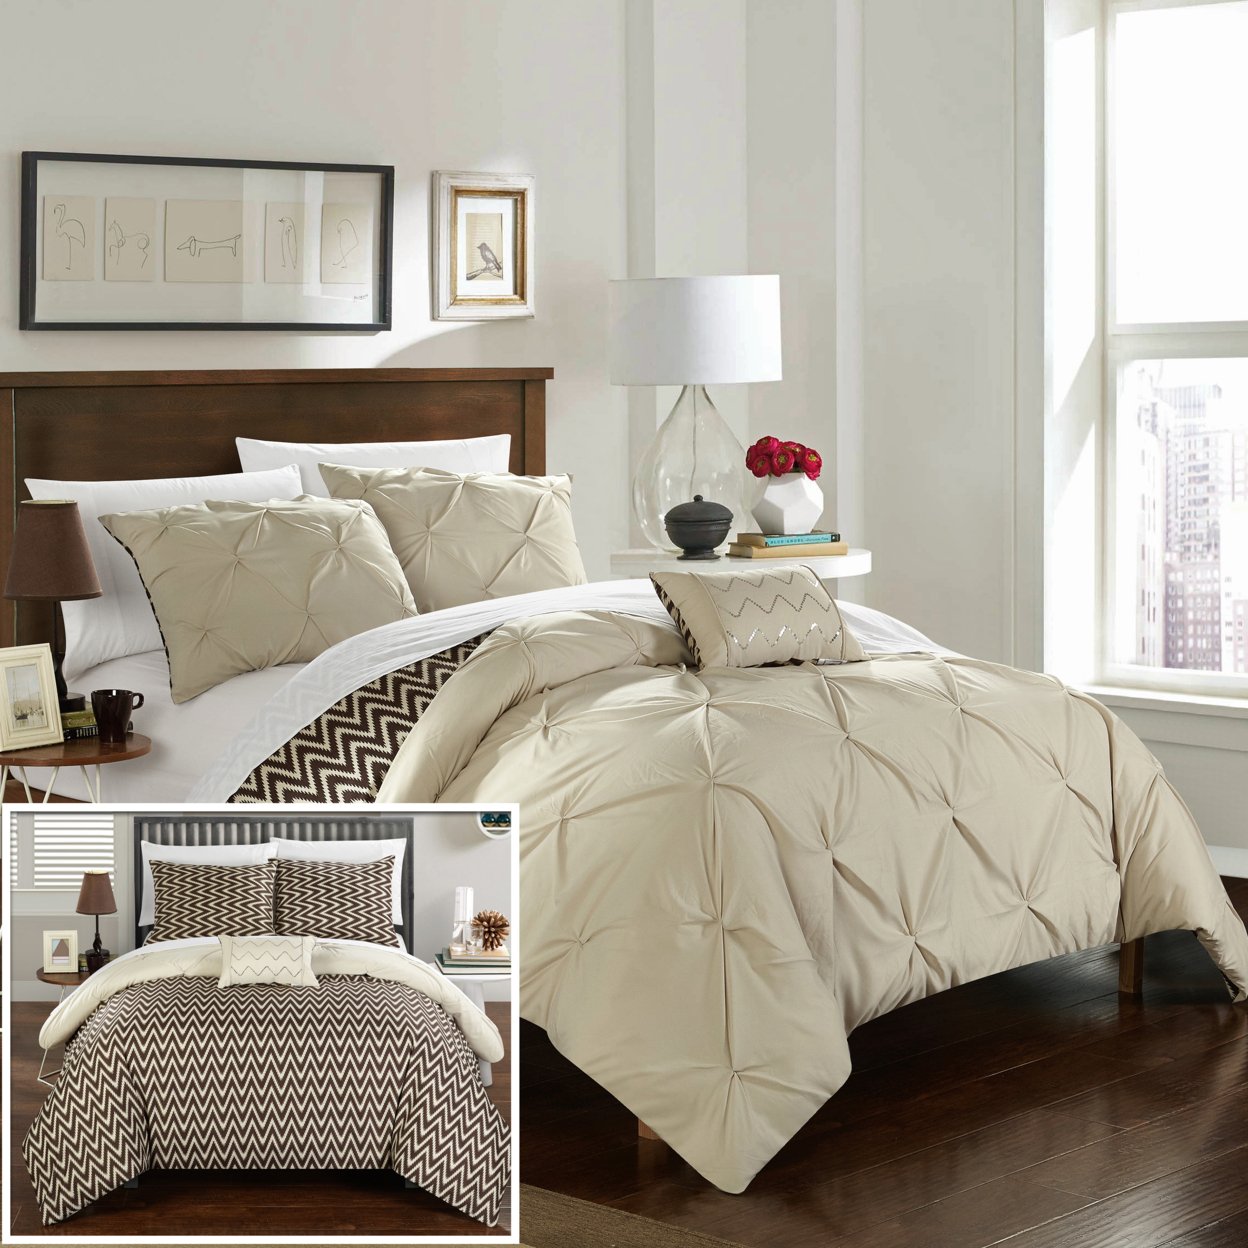 Chic Home 3/4 Piece Portia Pinch Pleated REVERSIBLE Chevron Print ruffled and pleated Comforter Set Shams and Decorative